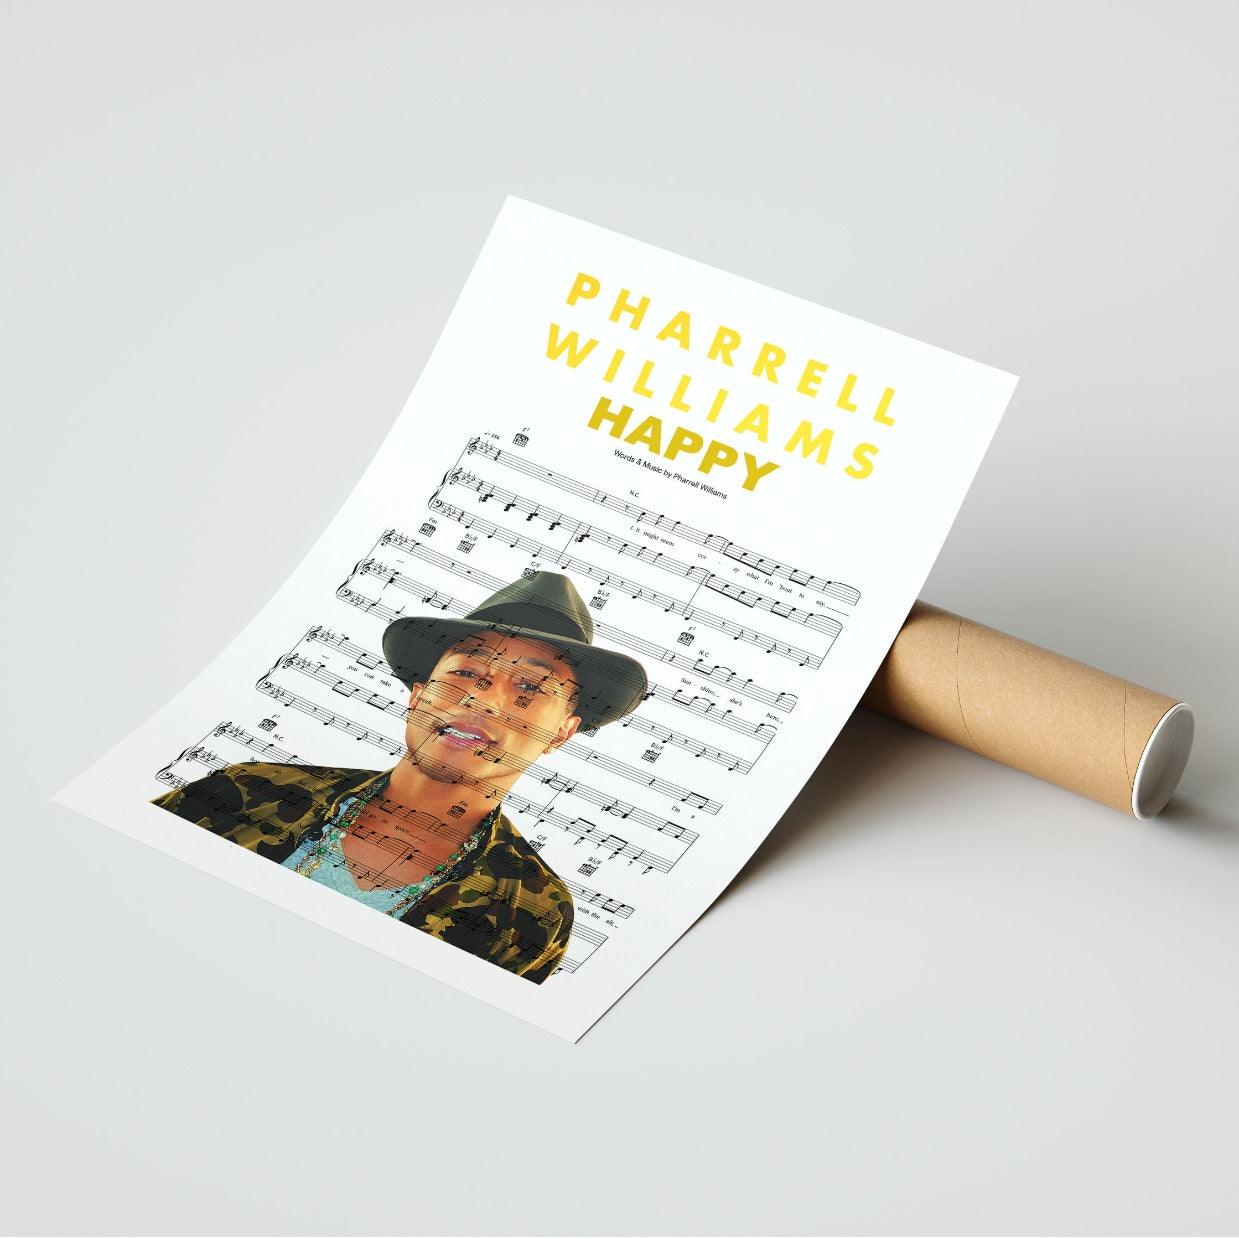 Pharrell Williams Happy Poster | 98 Best Song Music Sheet Notes Print  | Song Music Sheet Notes Print  Everyone has a favorite song and now you can show the score as printed staff. The personal favorite song sheet print shows the song chosen as the score. 